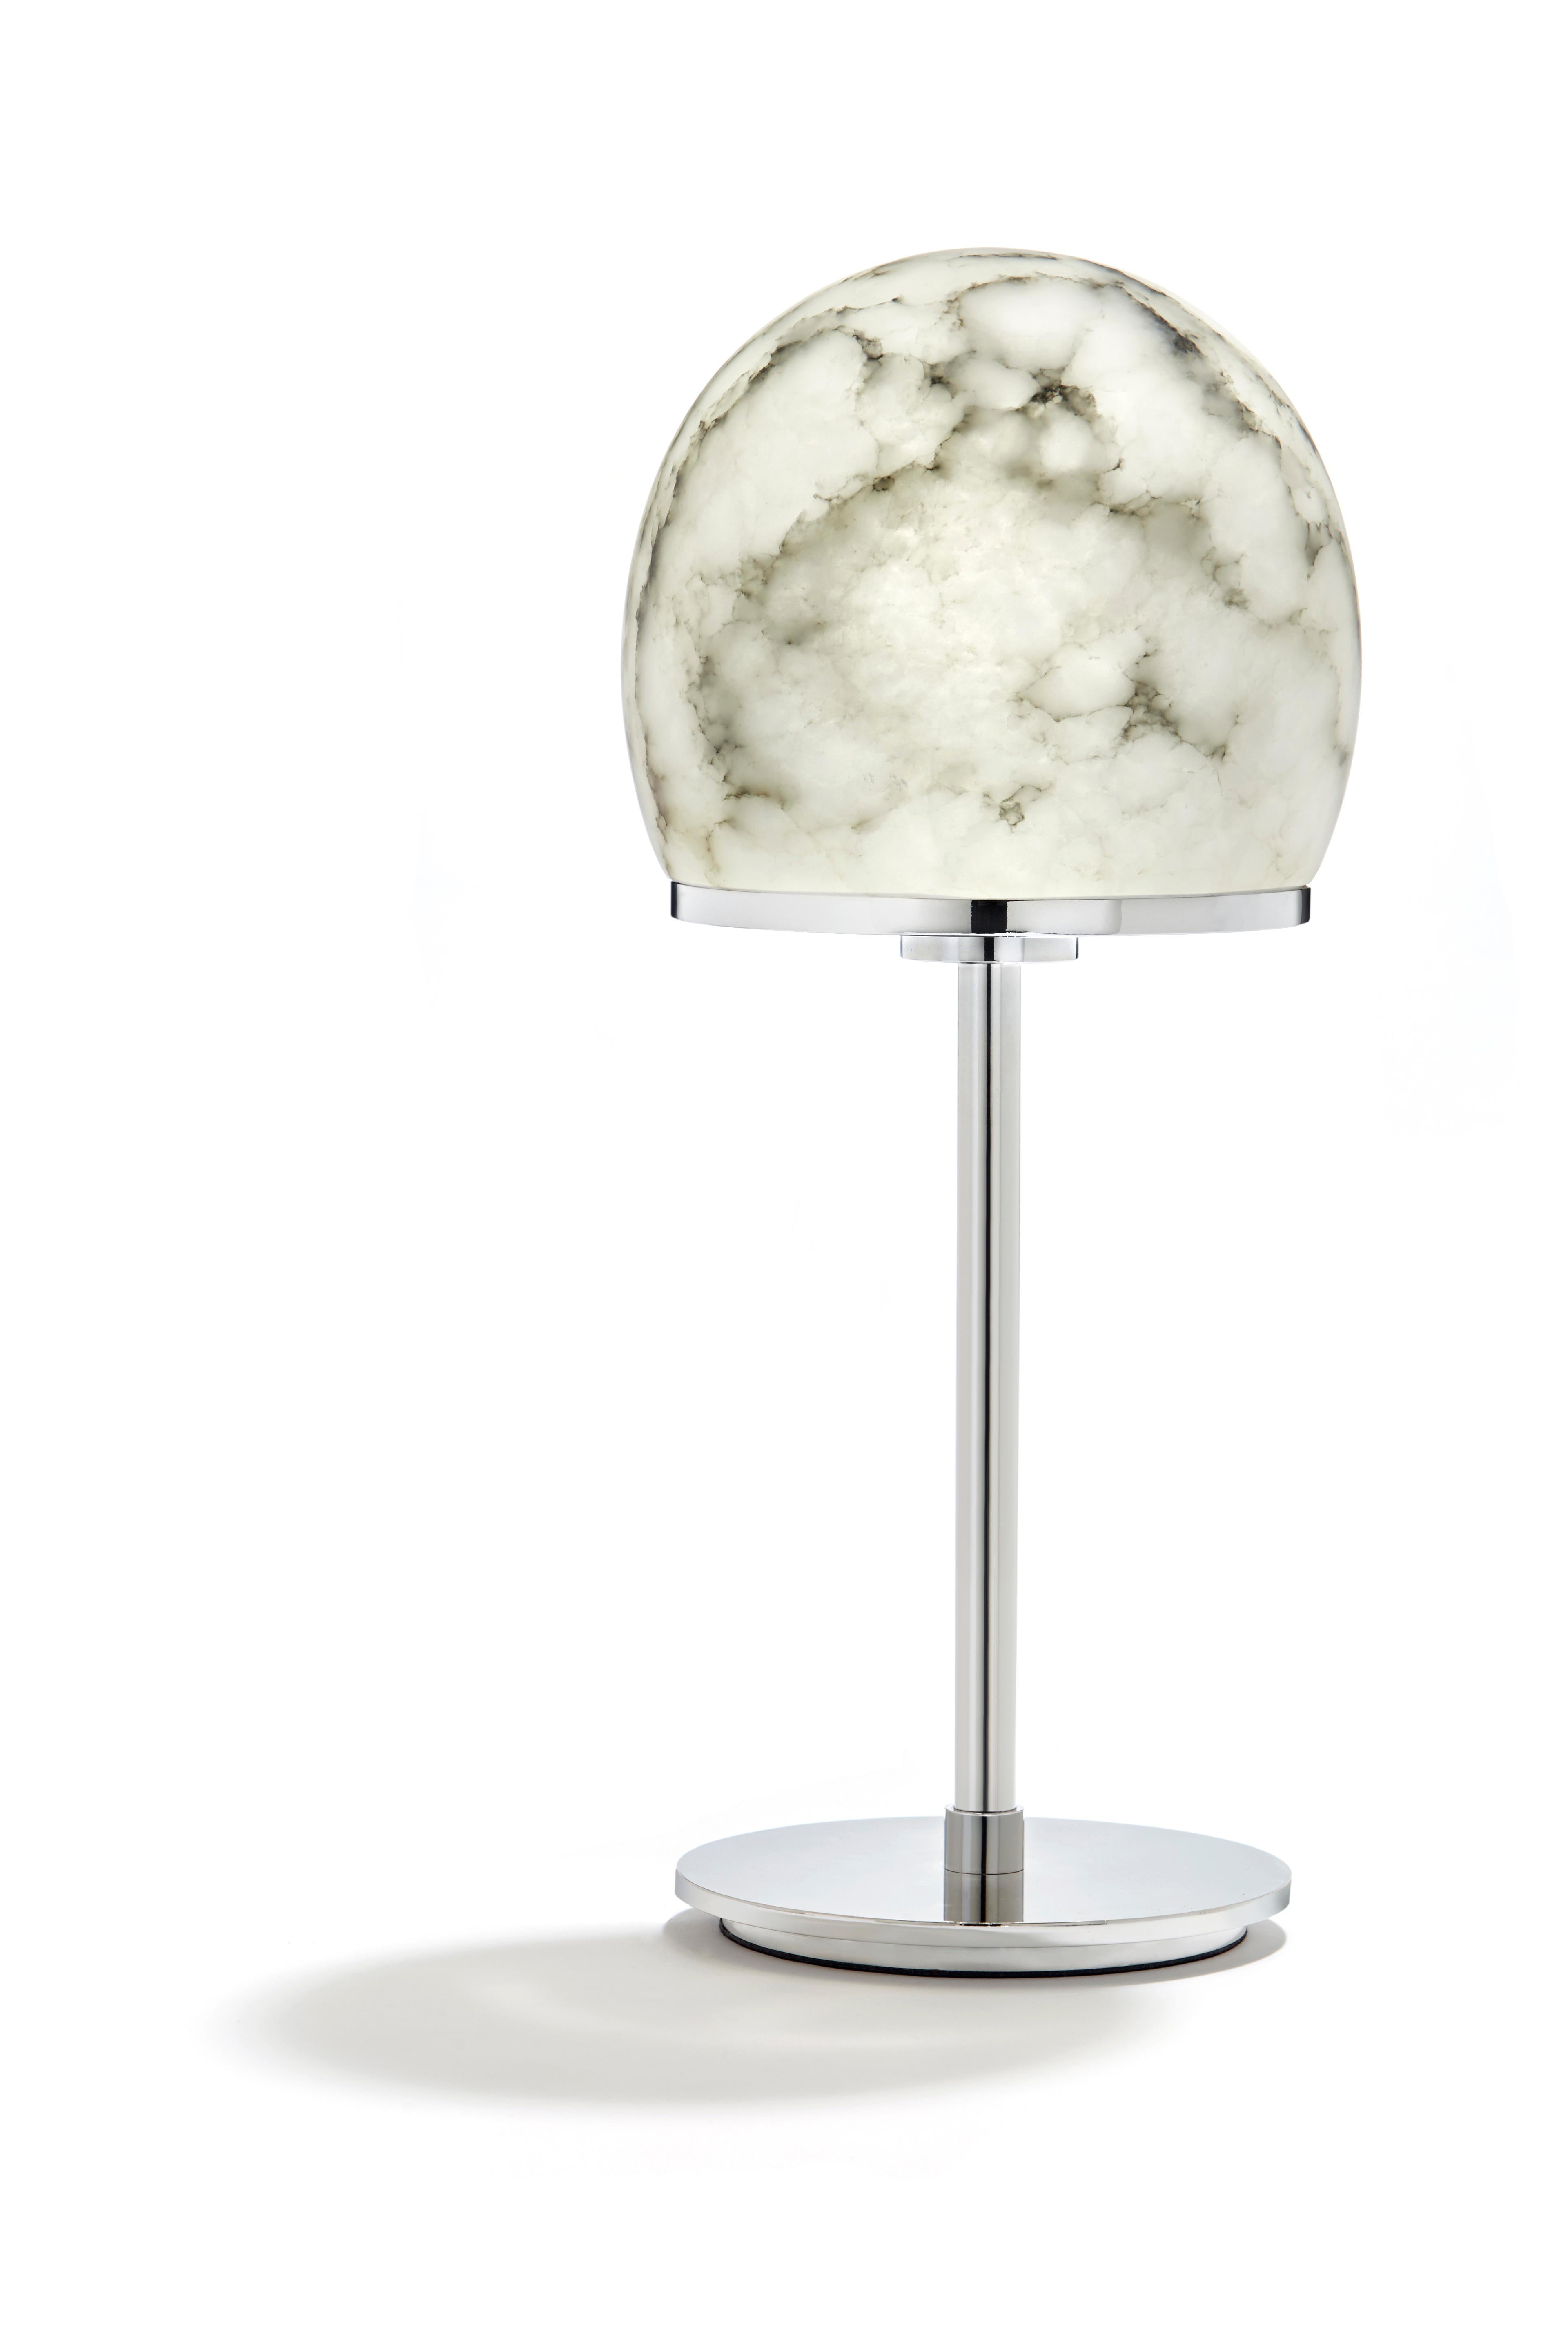 Inspired by one of Anna’s favorite foods, the humble mushroom, our Tartufo (“Truffle” in Italian) lamp is playful elegance itself. Hand-crafted in Italy from alabaster, each lamp is unique.